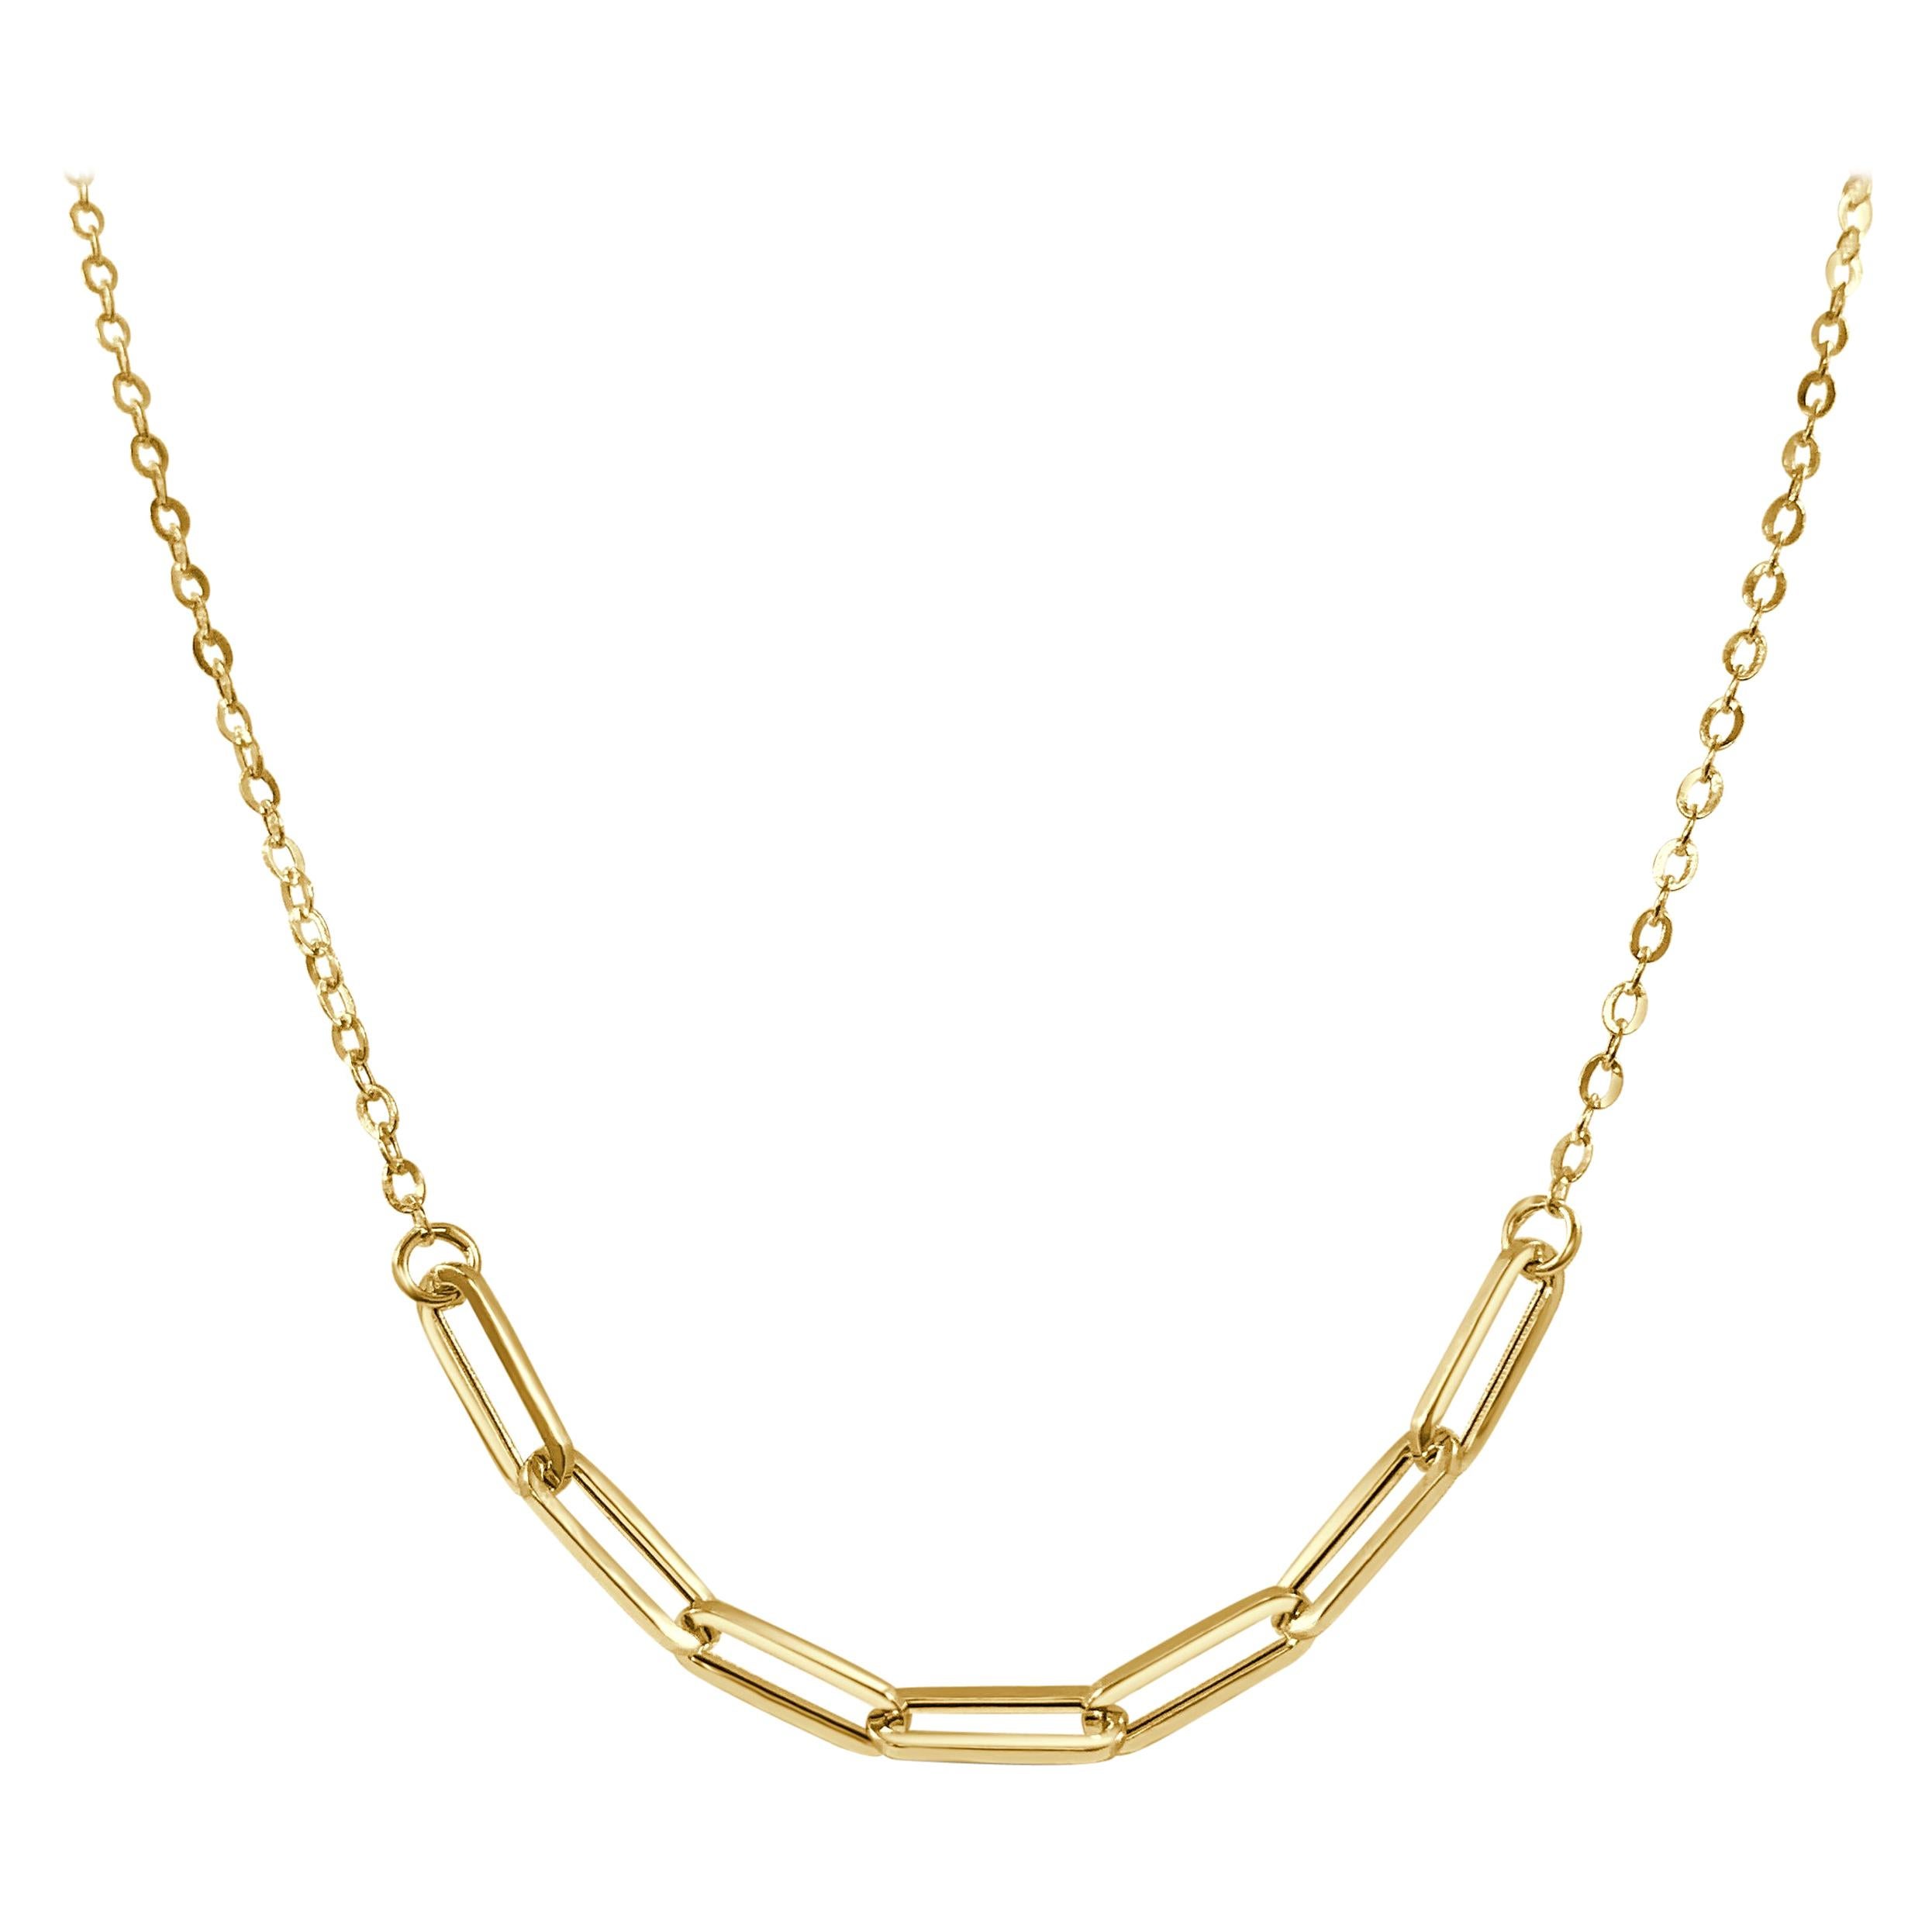 14 Karat Yellow Gold 1.40 Grams Paperclip Link Chain Necklace, Gifts for Her